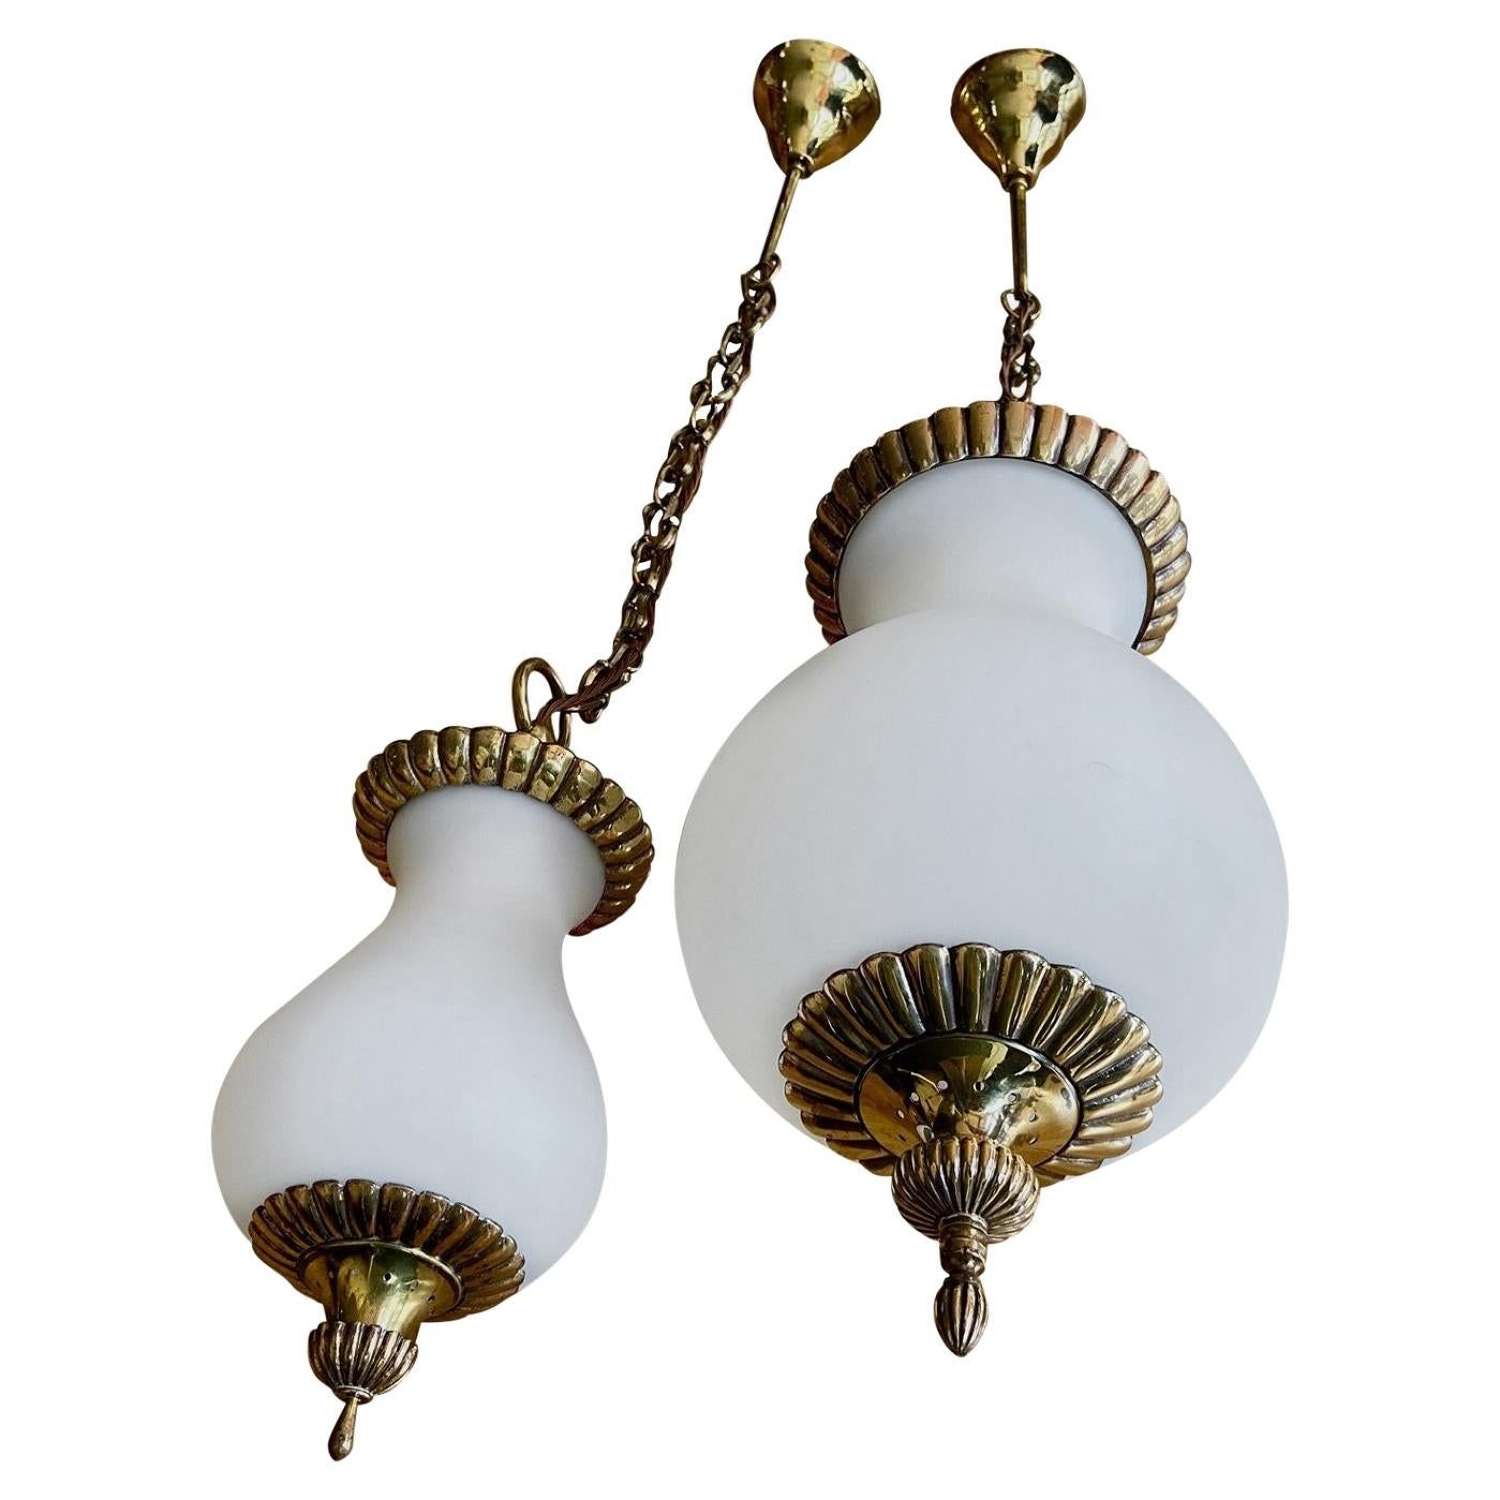 One Large and One Small Glass and Brass Lanterns or Pendant Lights